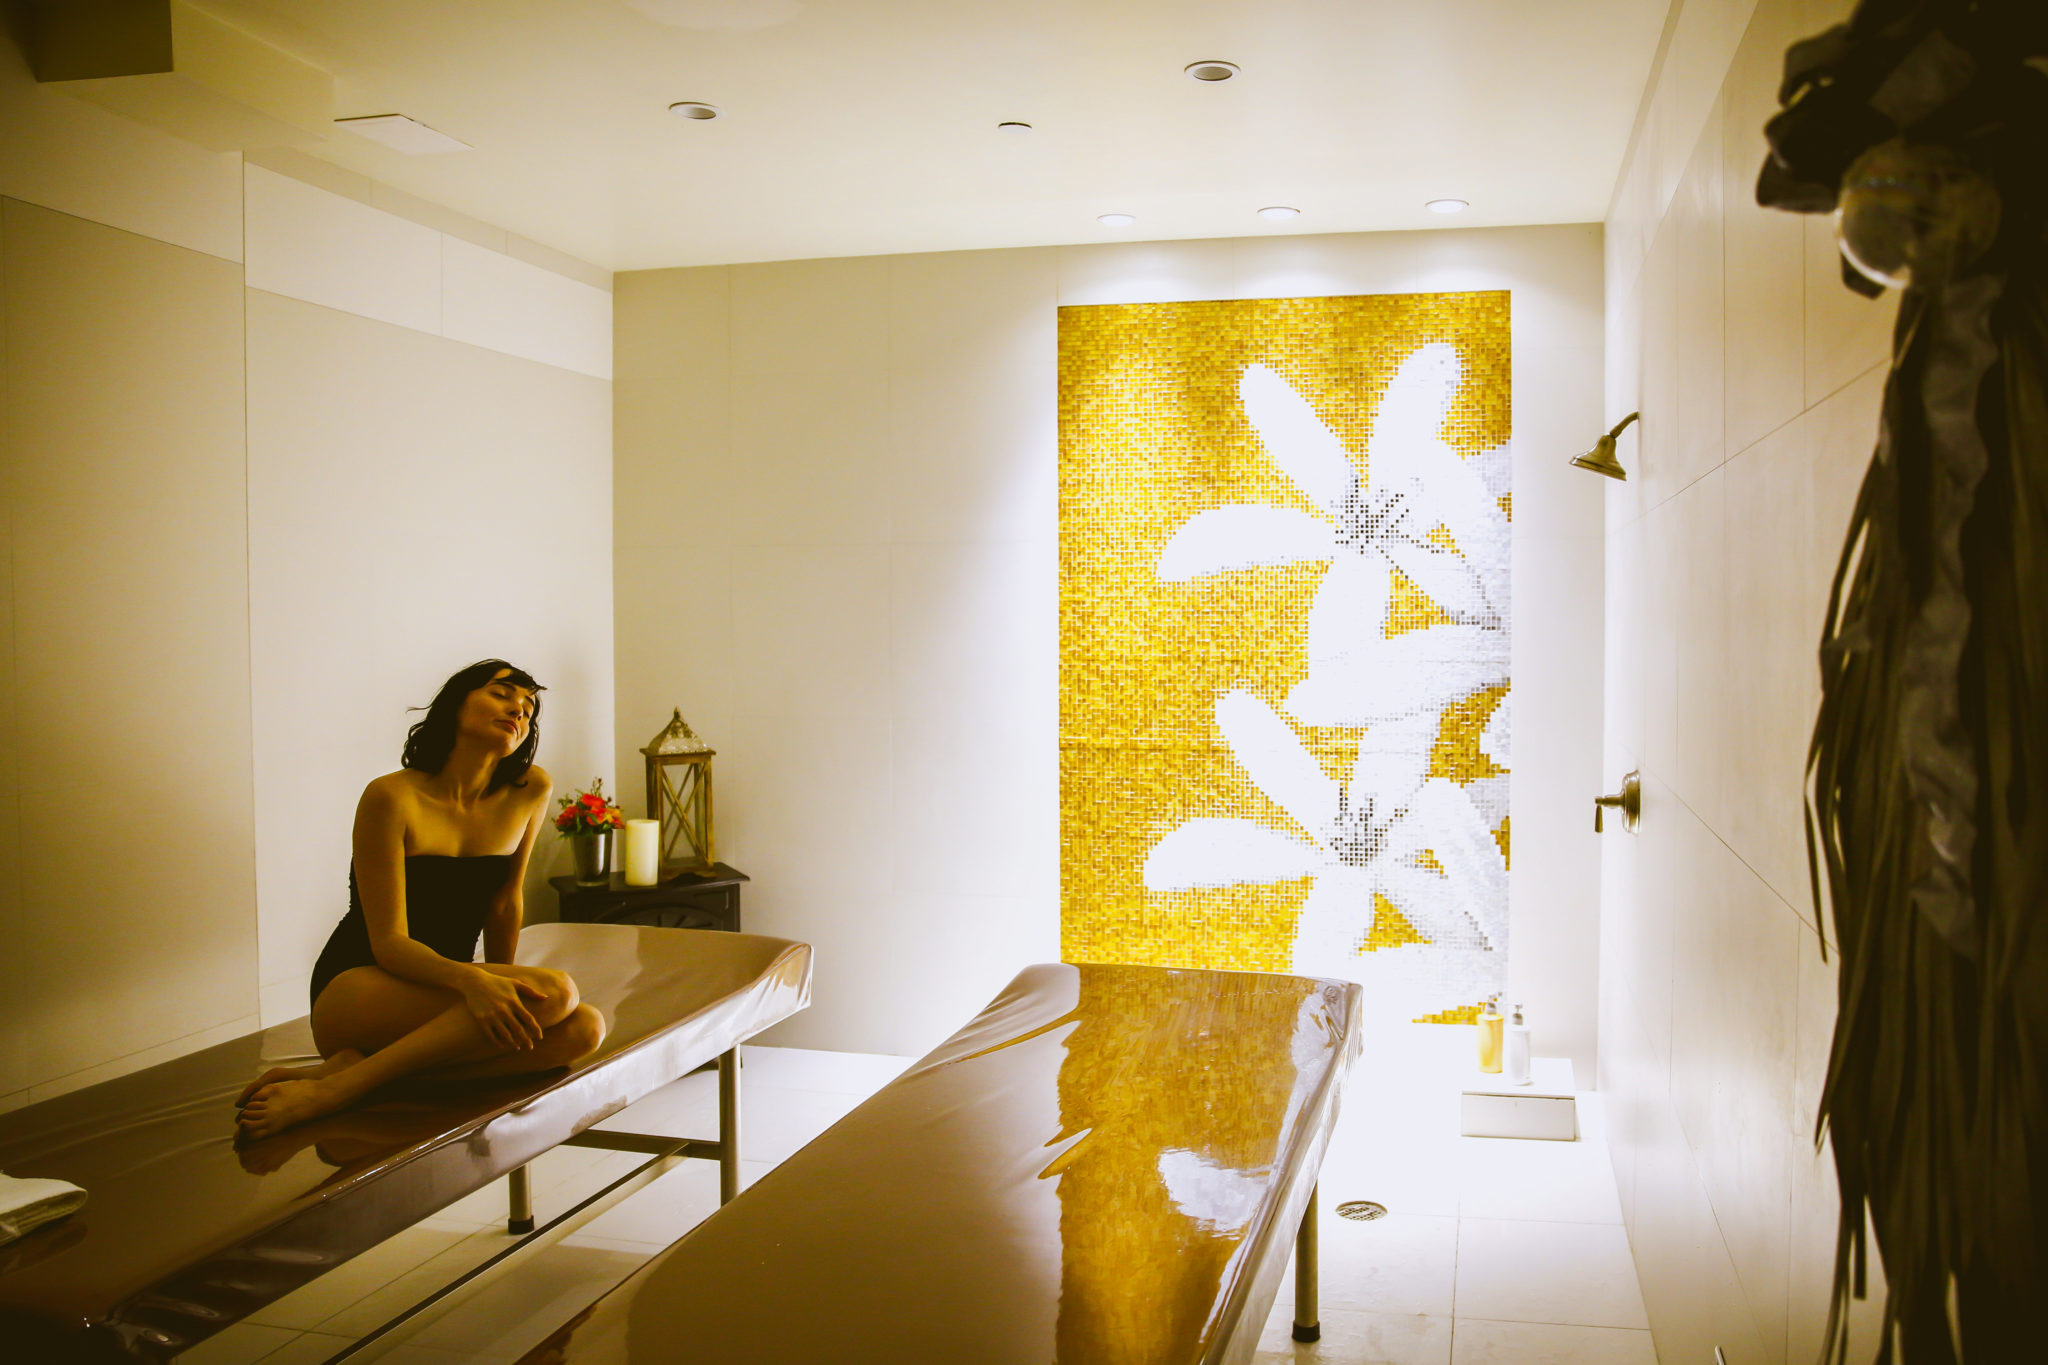 About Us Juvenex Spa Massage In New York Nyc Luxury 24 7 Spa In New York City